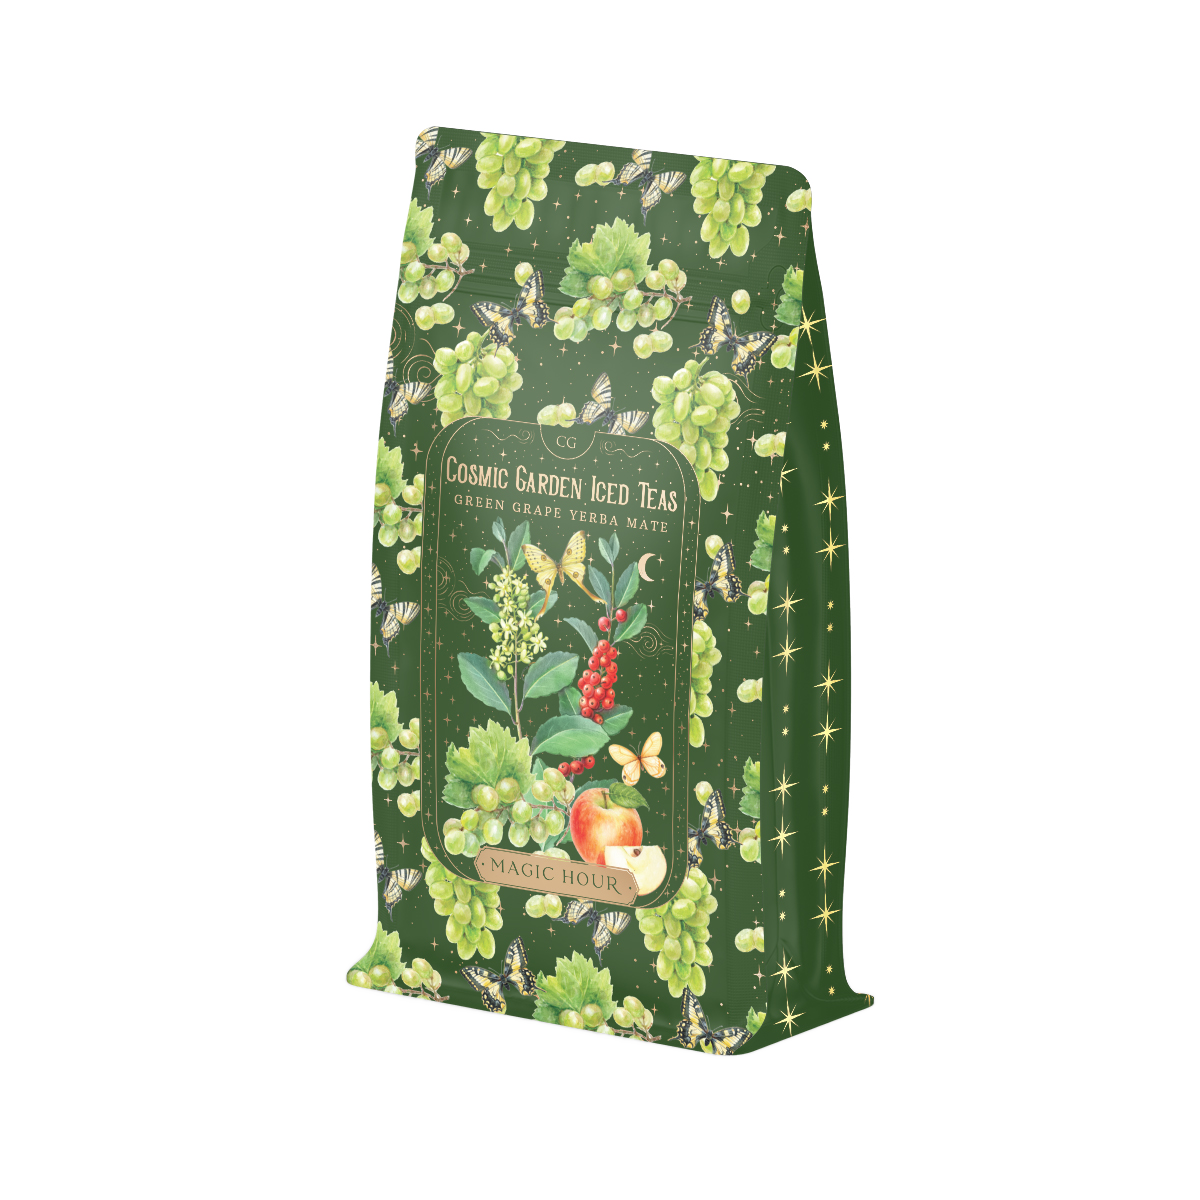 A green package of Green Grape Yerba Mate: Cosmic Garden Iced Tea from Magic Hour. The design features illustrations of green grapes, honeybees, and apple slices on a dark green background, giving it a natural and whimsical look. Enjoy this delightful organic tea in loose leaf form.